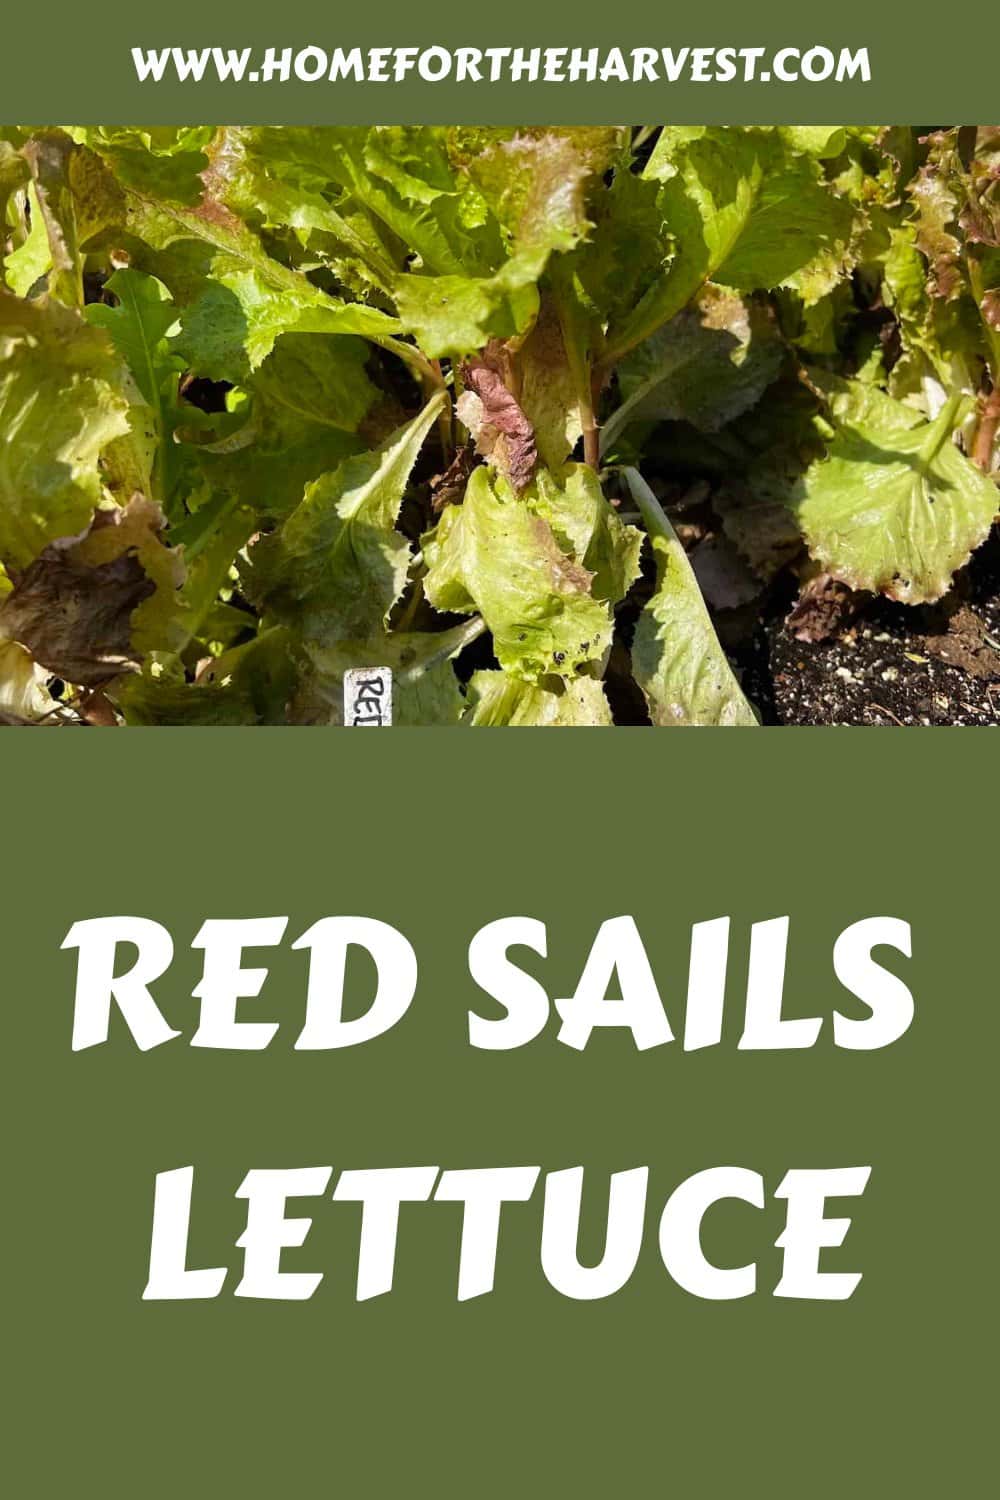 Red sails lettuce generated pin 37086